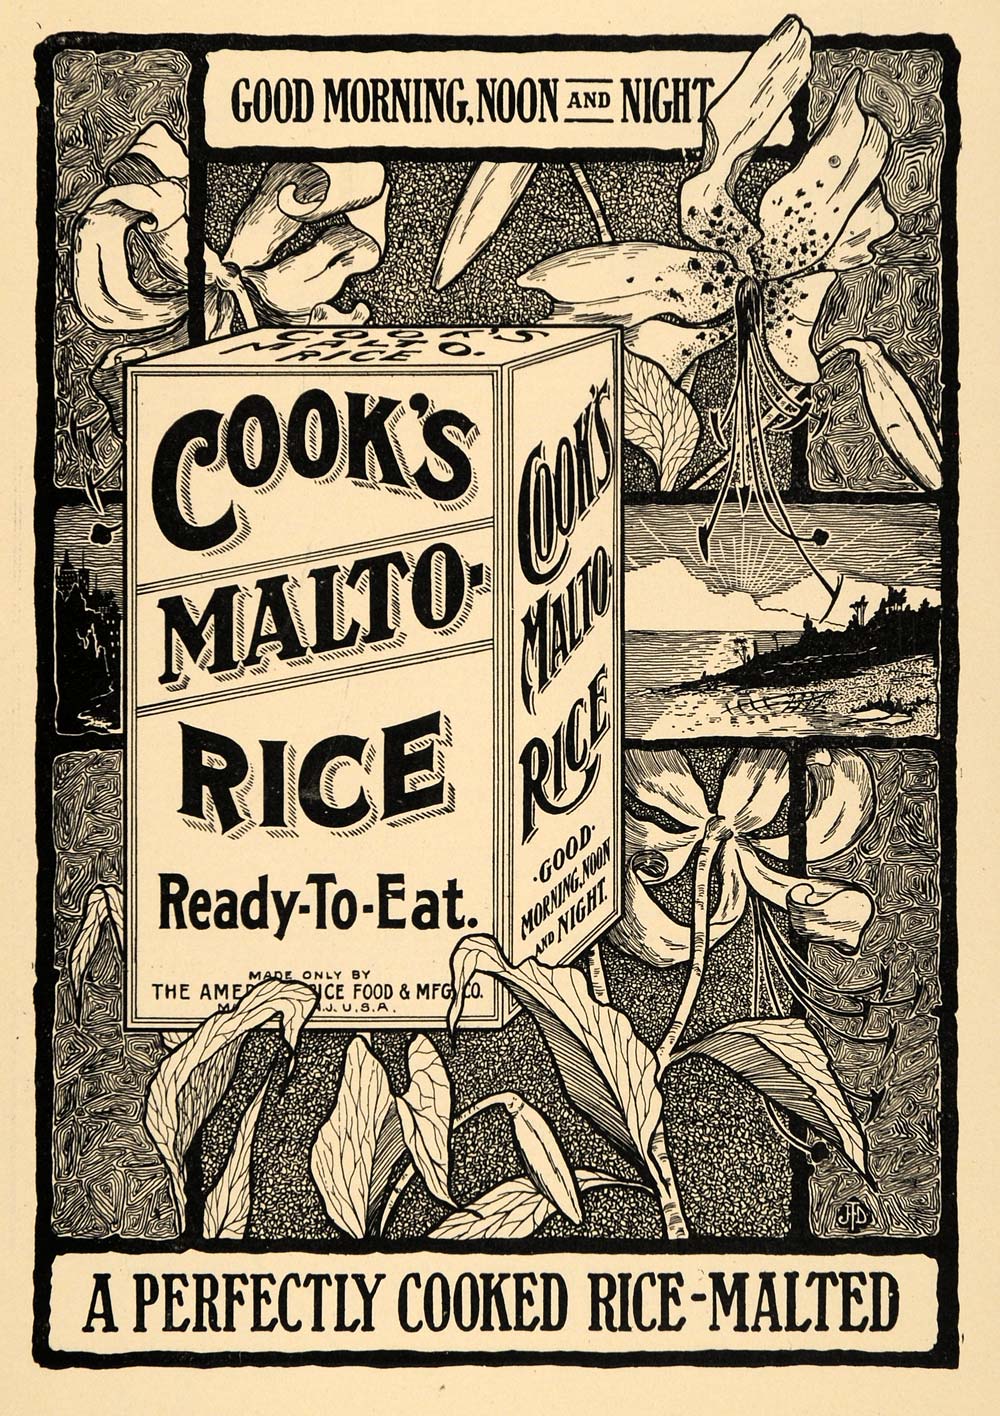 1907 Ad Lily Flowers Cook's Malto-Rice Ready to Eat - ORIGINAL ADVERTISING TIN4